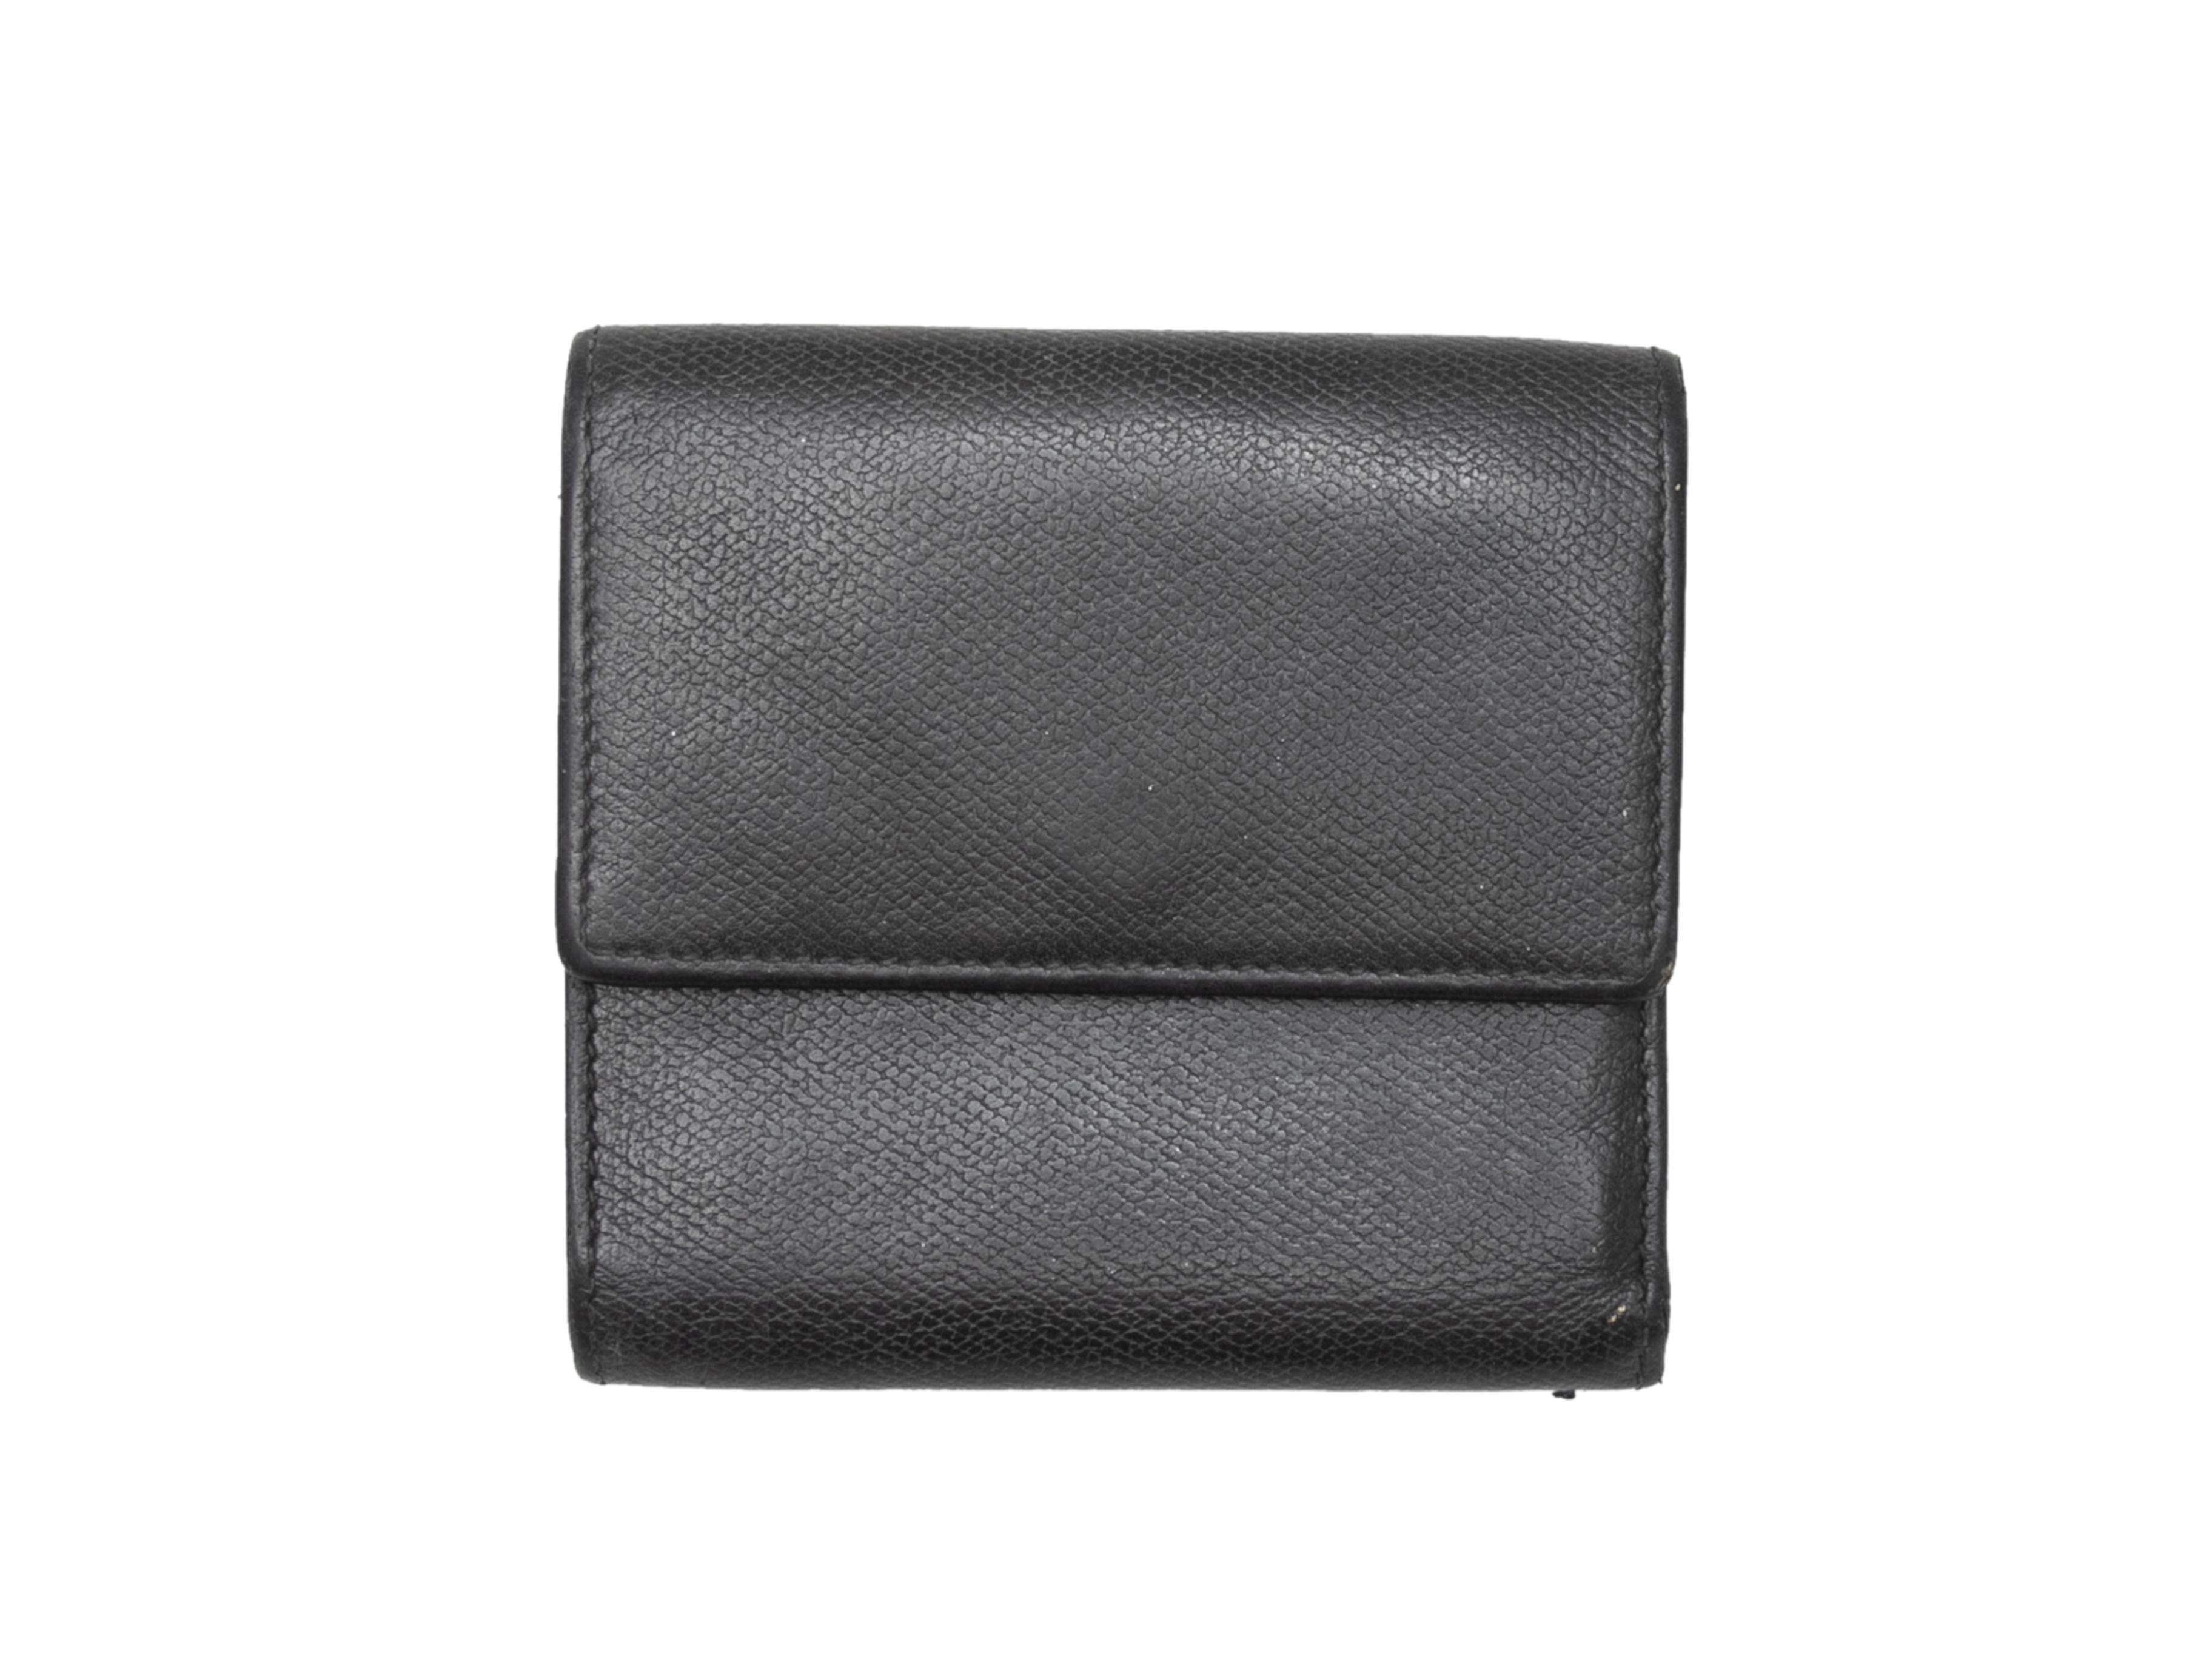 Vintage black leather wallet by Chanel. Multiple interior card and cash slots. Front snap closure. 4